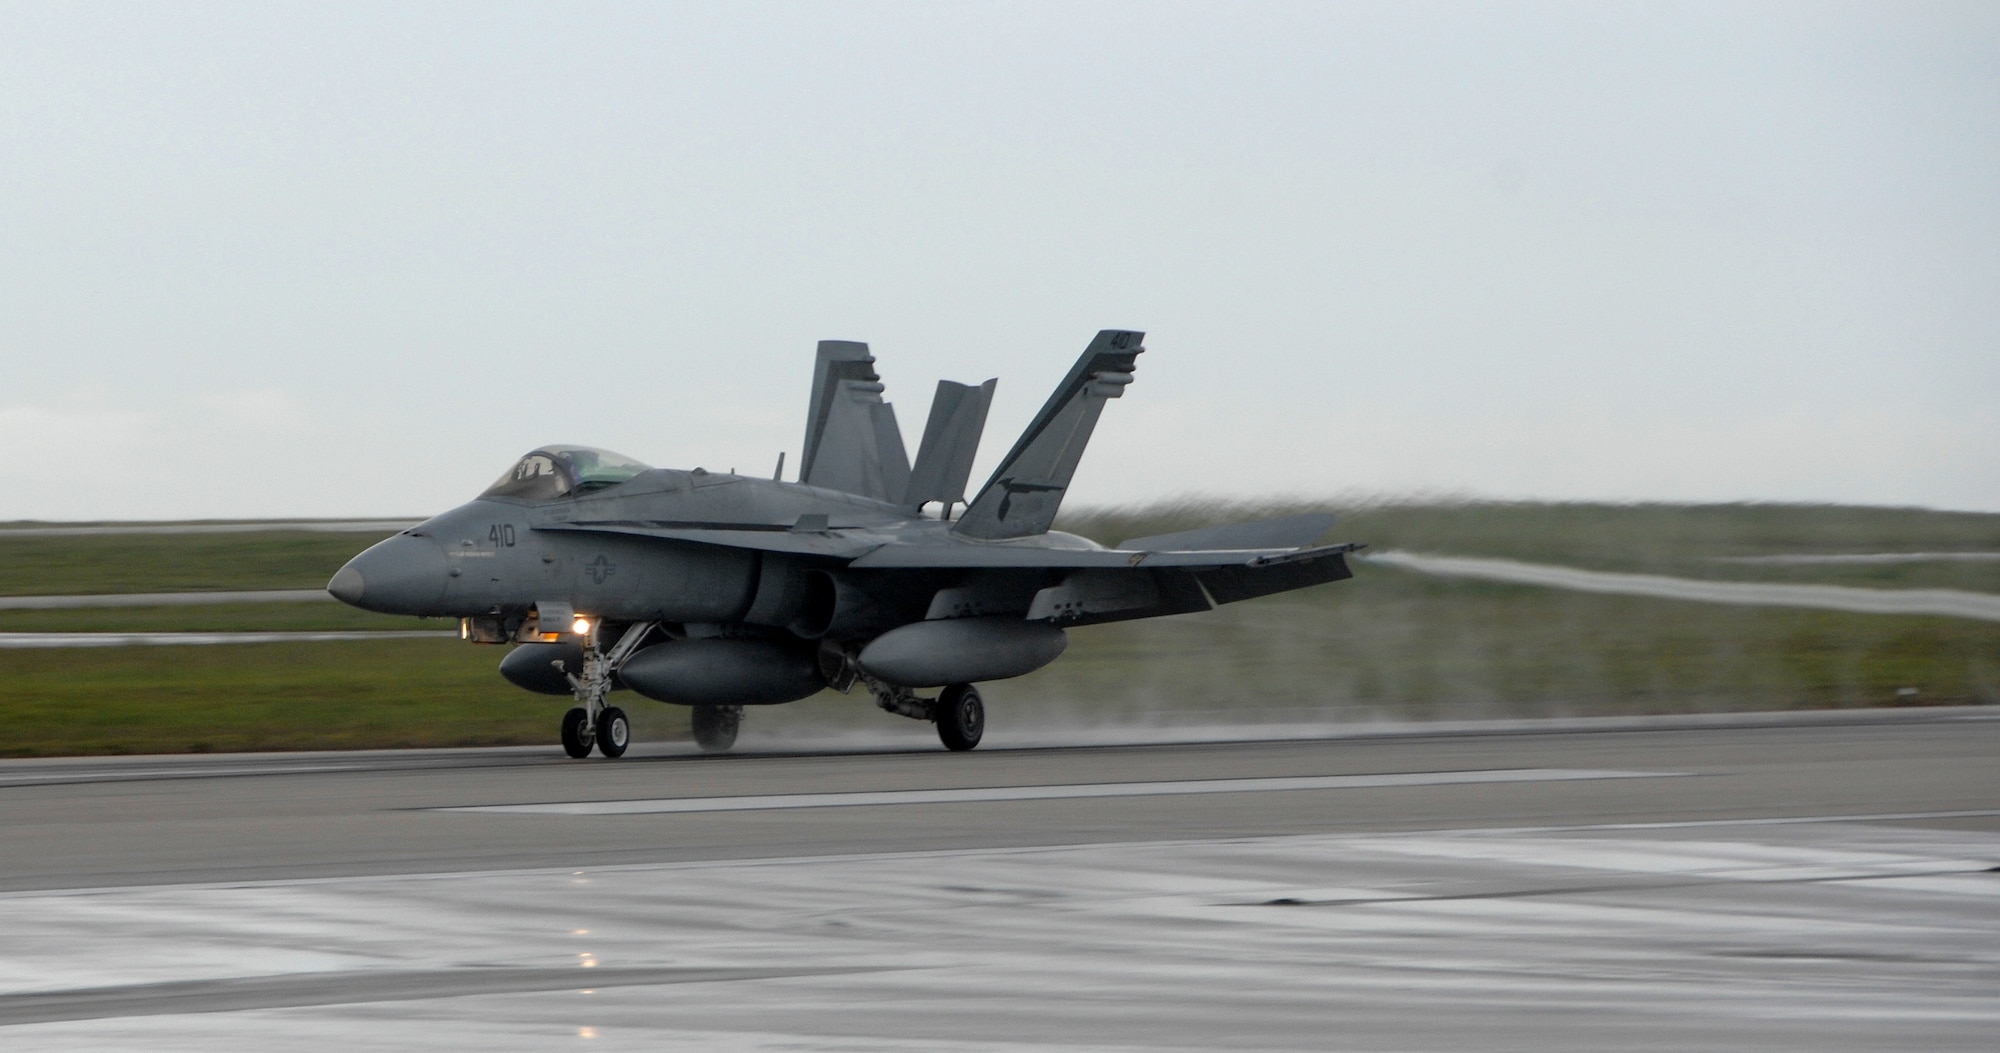 A U.S. Navy F/A-18 Hornet, from Strike Fighter Squadron 94 at Naval Air Station Lemoore, Calif., lands at Andersen Air Force Base July 9. The F/A-18 is a strike fighter aircraft flown by the Navy and Marine Corps.   Aircrews from 12 Hornets used Andersen as a resting point during their flight from California to Australia where they will participate in an exercise with the Australian Air Force.  (U.S. Air Force photo by Airman 1st Class Courtney Witt)